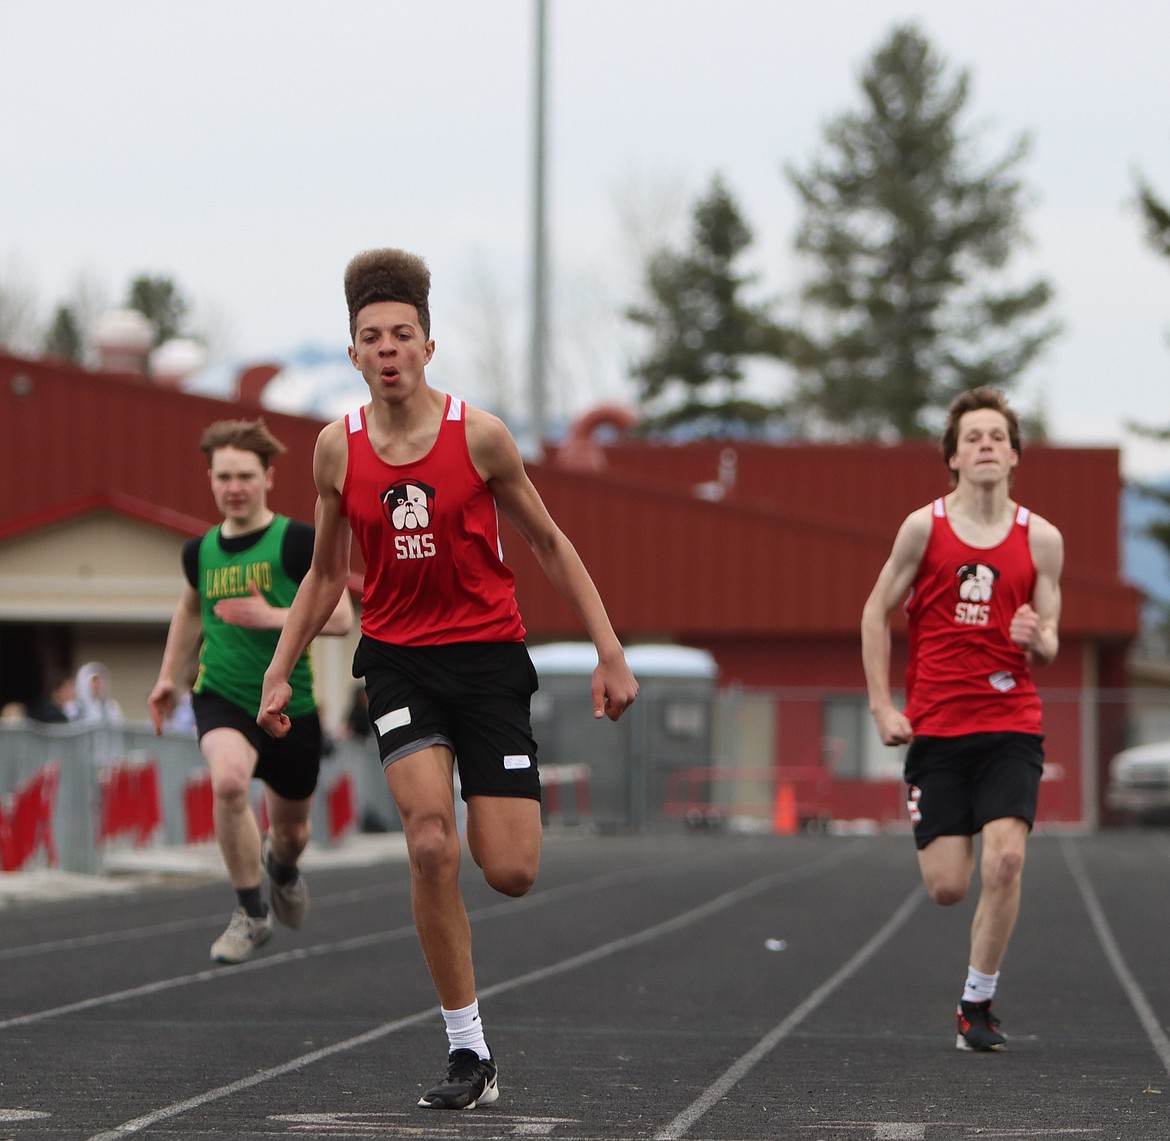 From left, Trey Blumenberg and Landon Brinkmeier get ready to cross the line for Sandpoint in the 100-meter dash